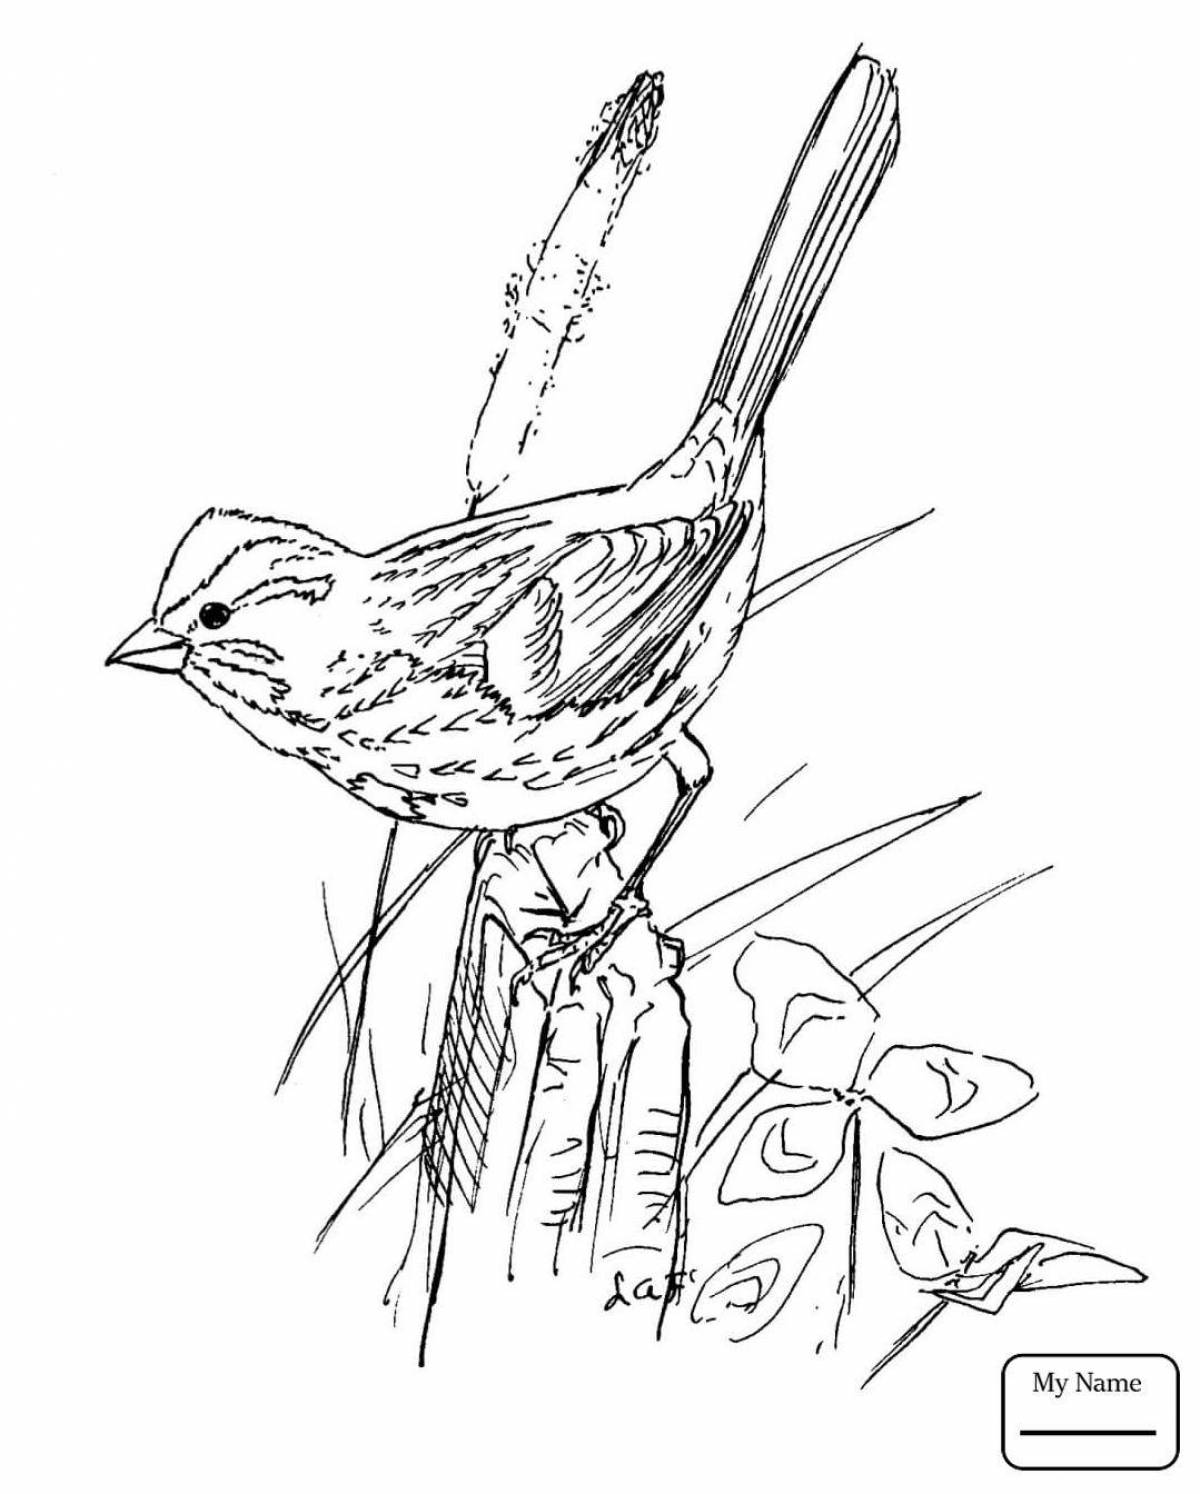 Artistic drawing of a ruffled sparrow